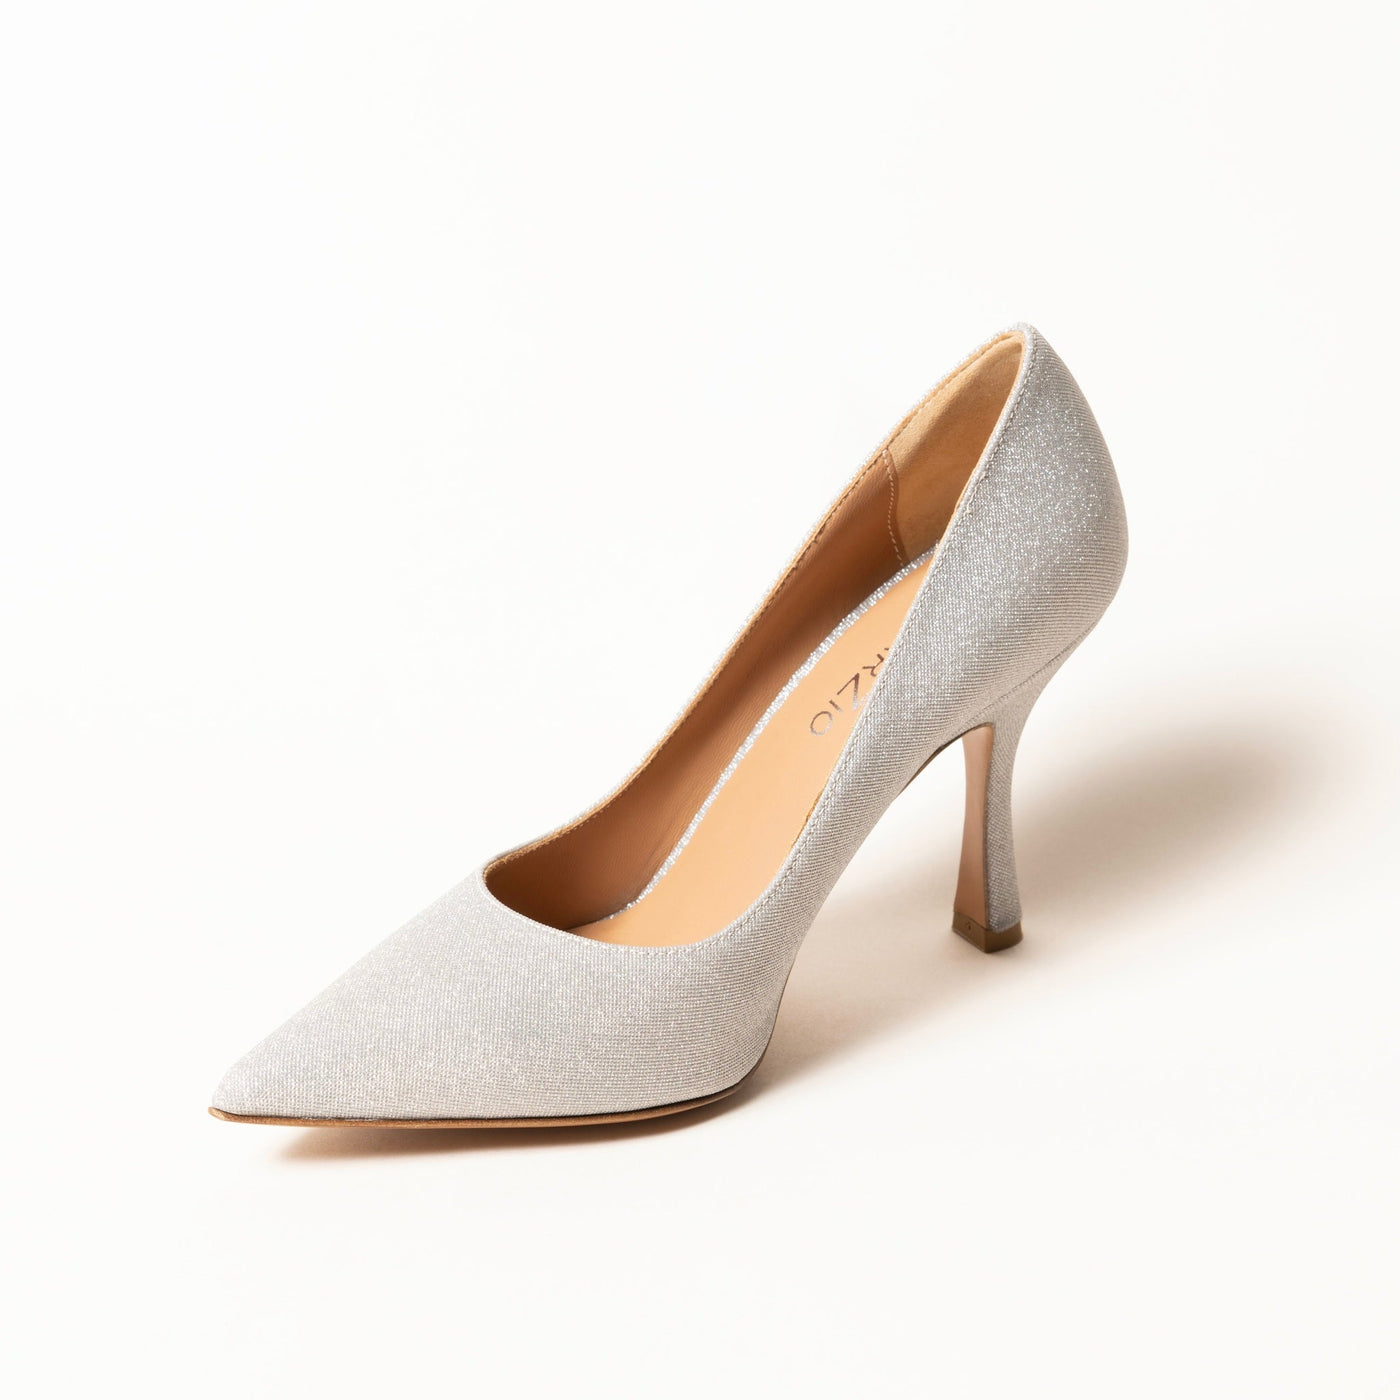 Glitter silver pumps with pointy toe and curved heel. 